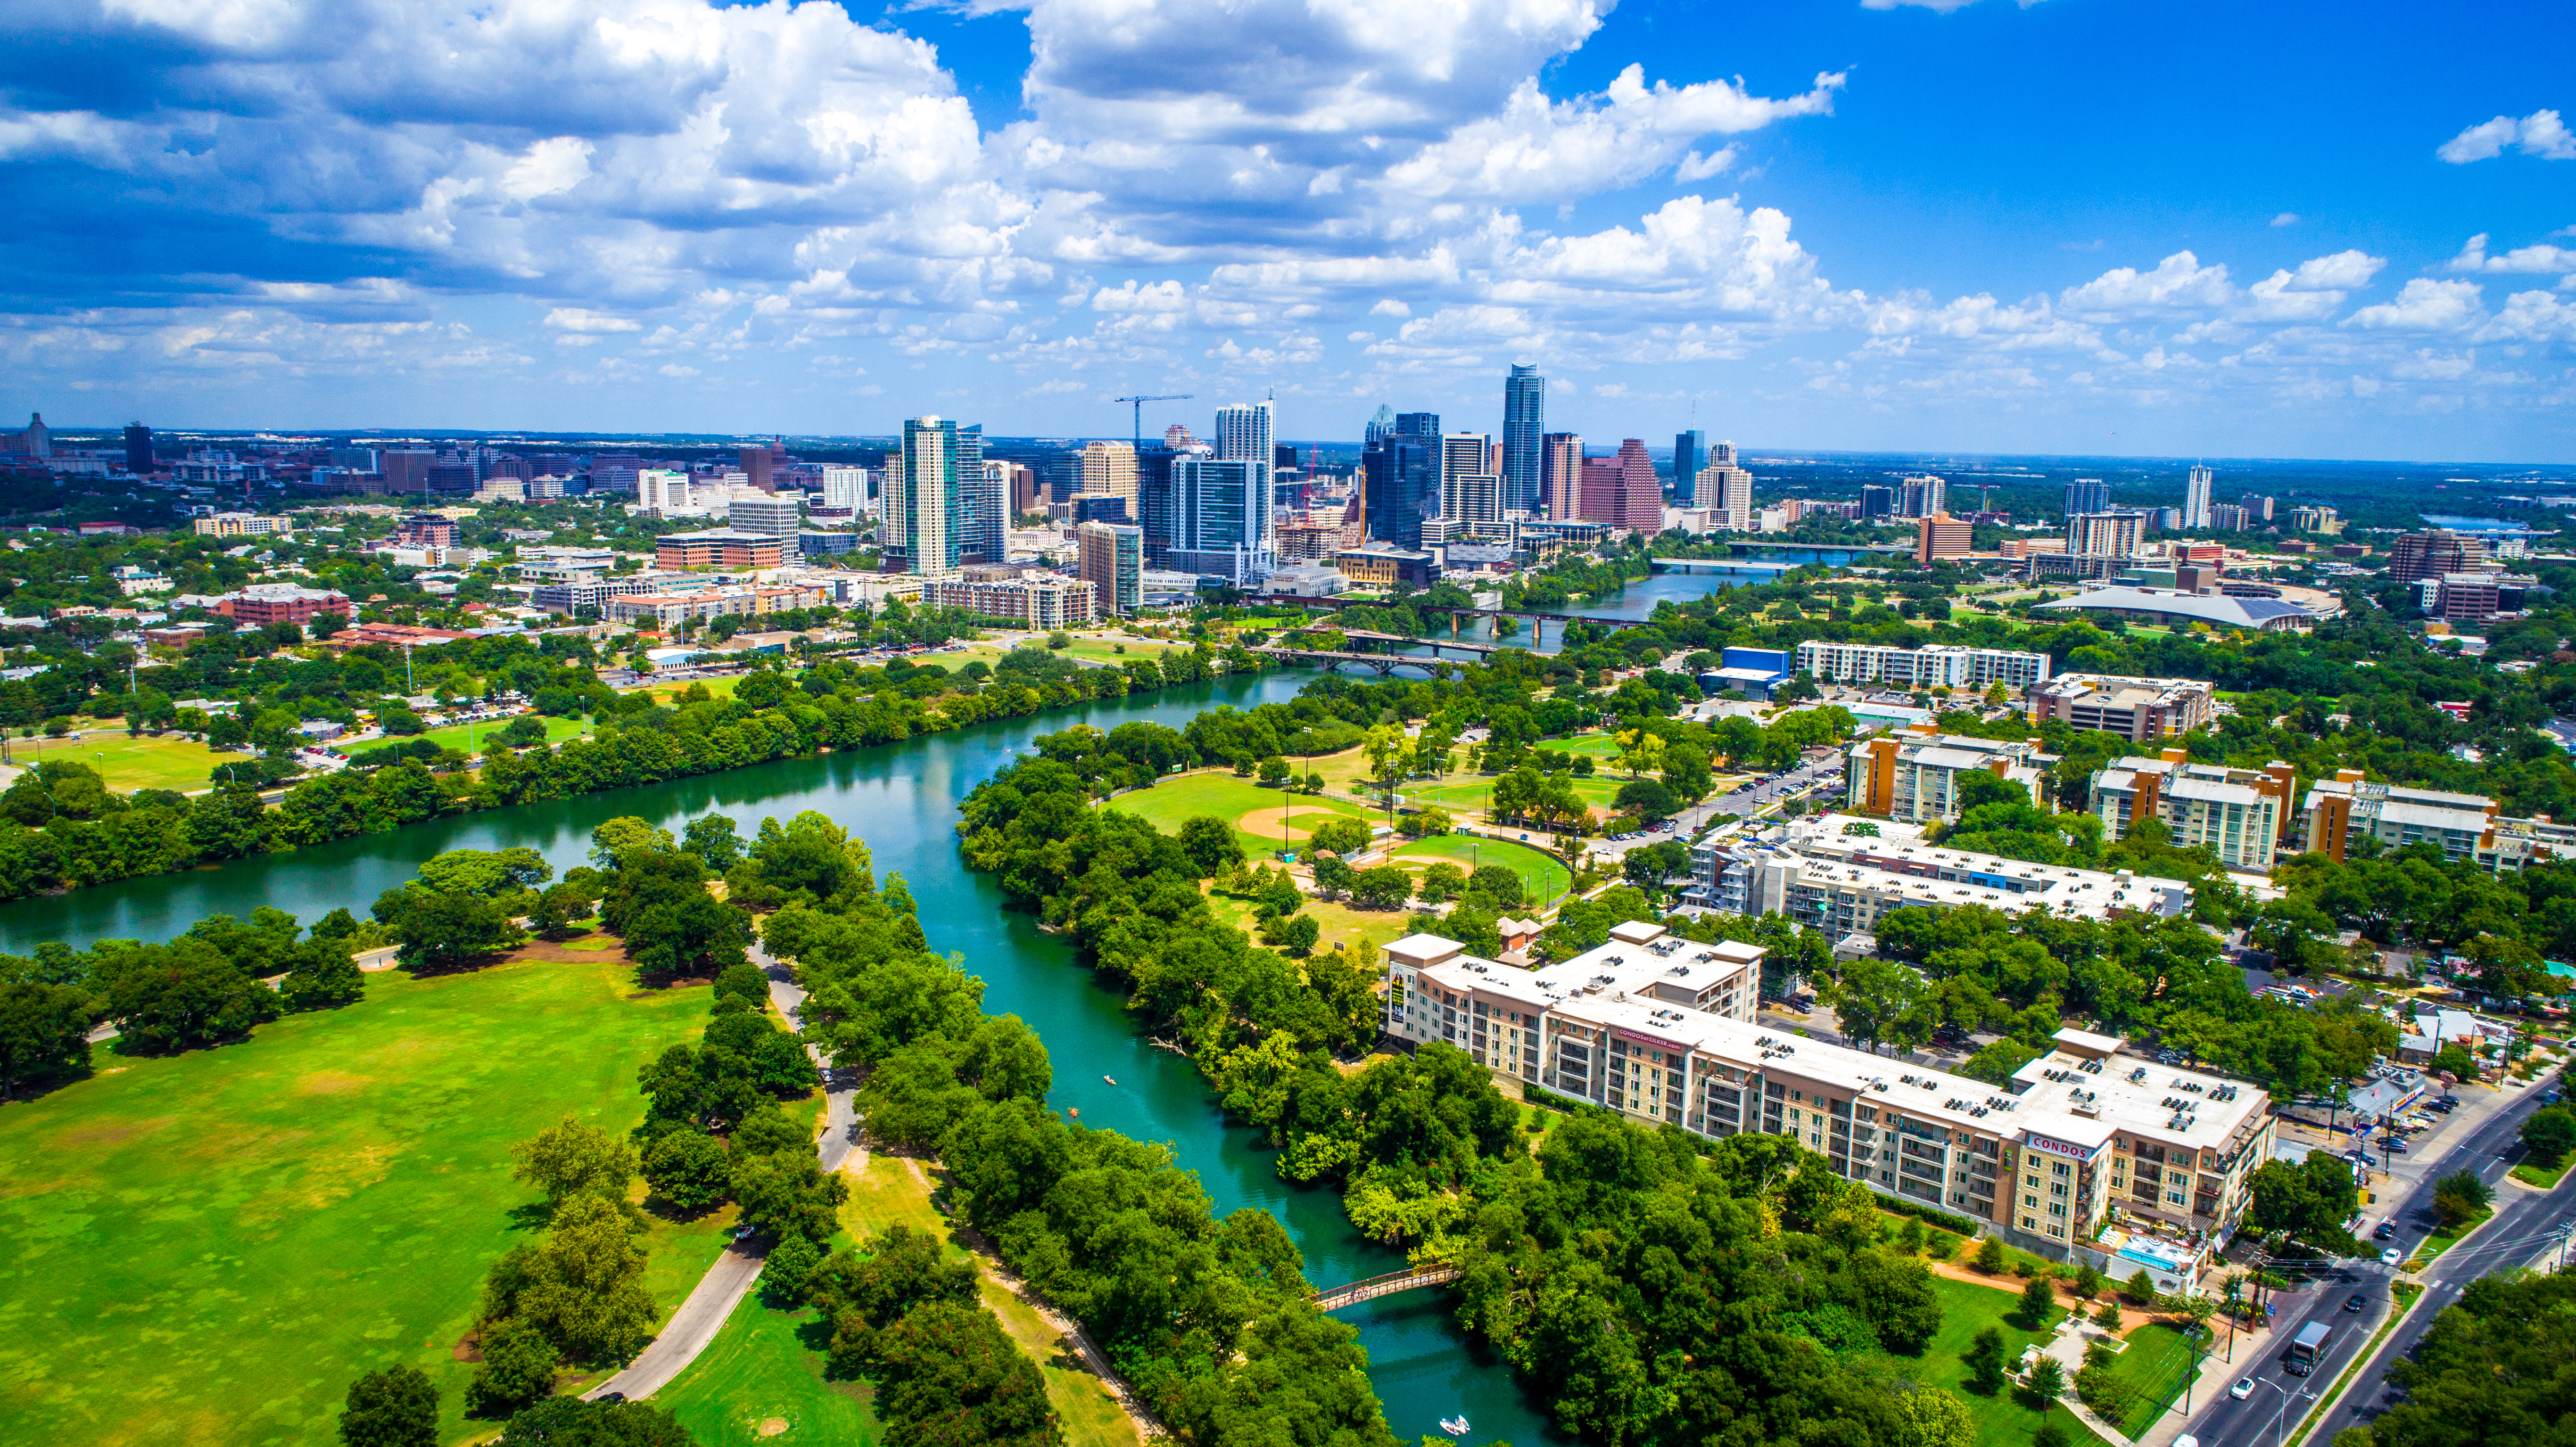 Photo of downtown Austin aerial view